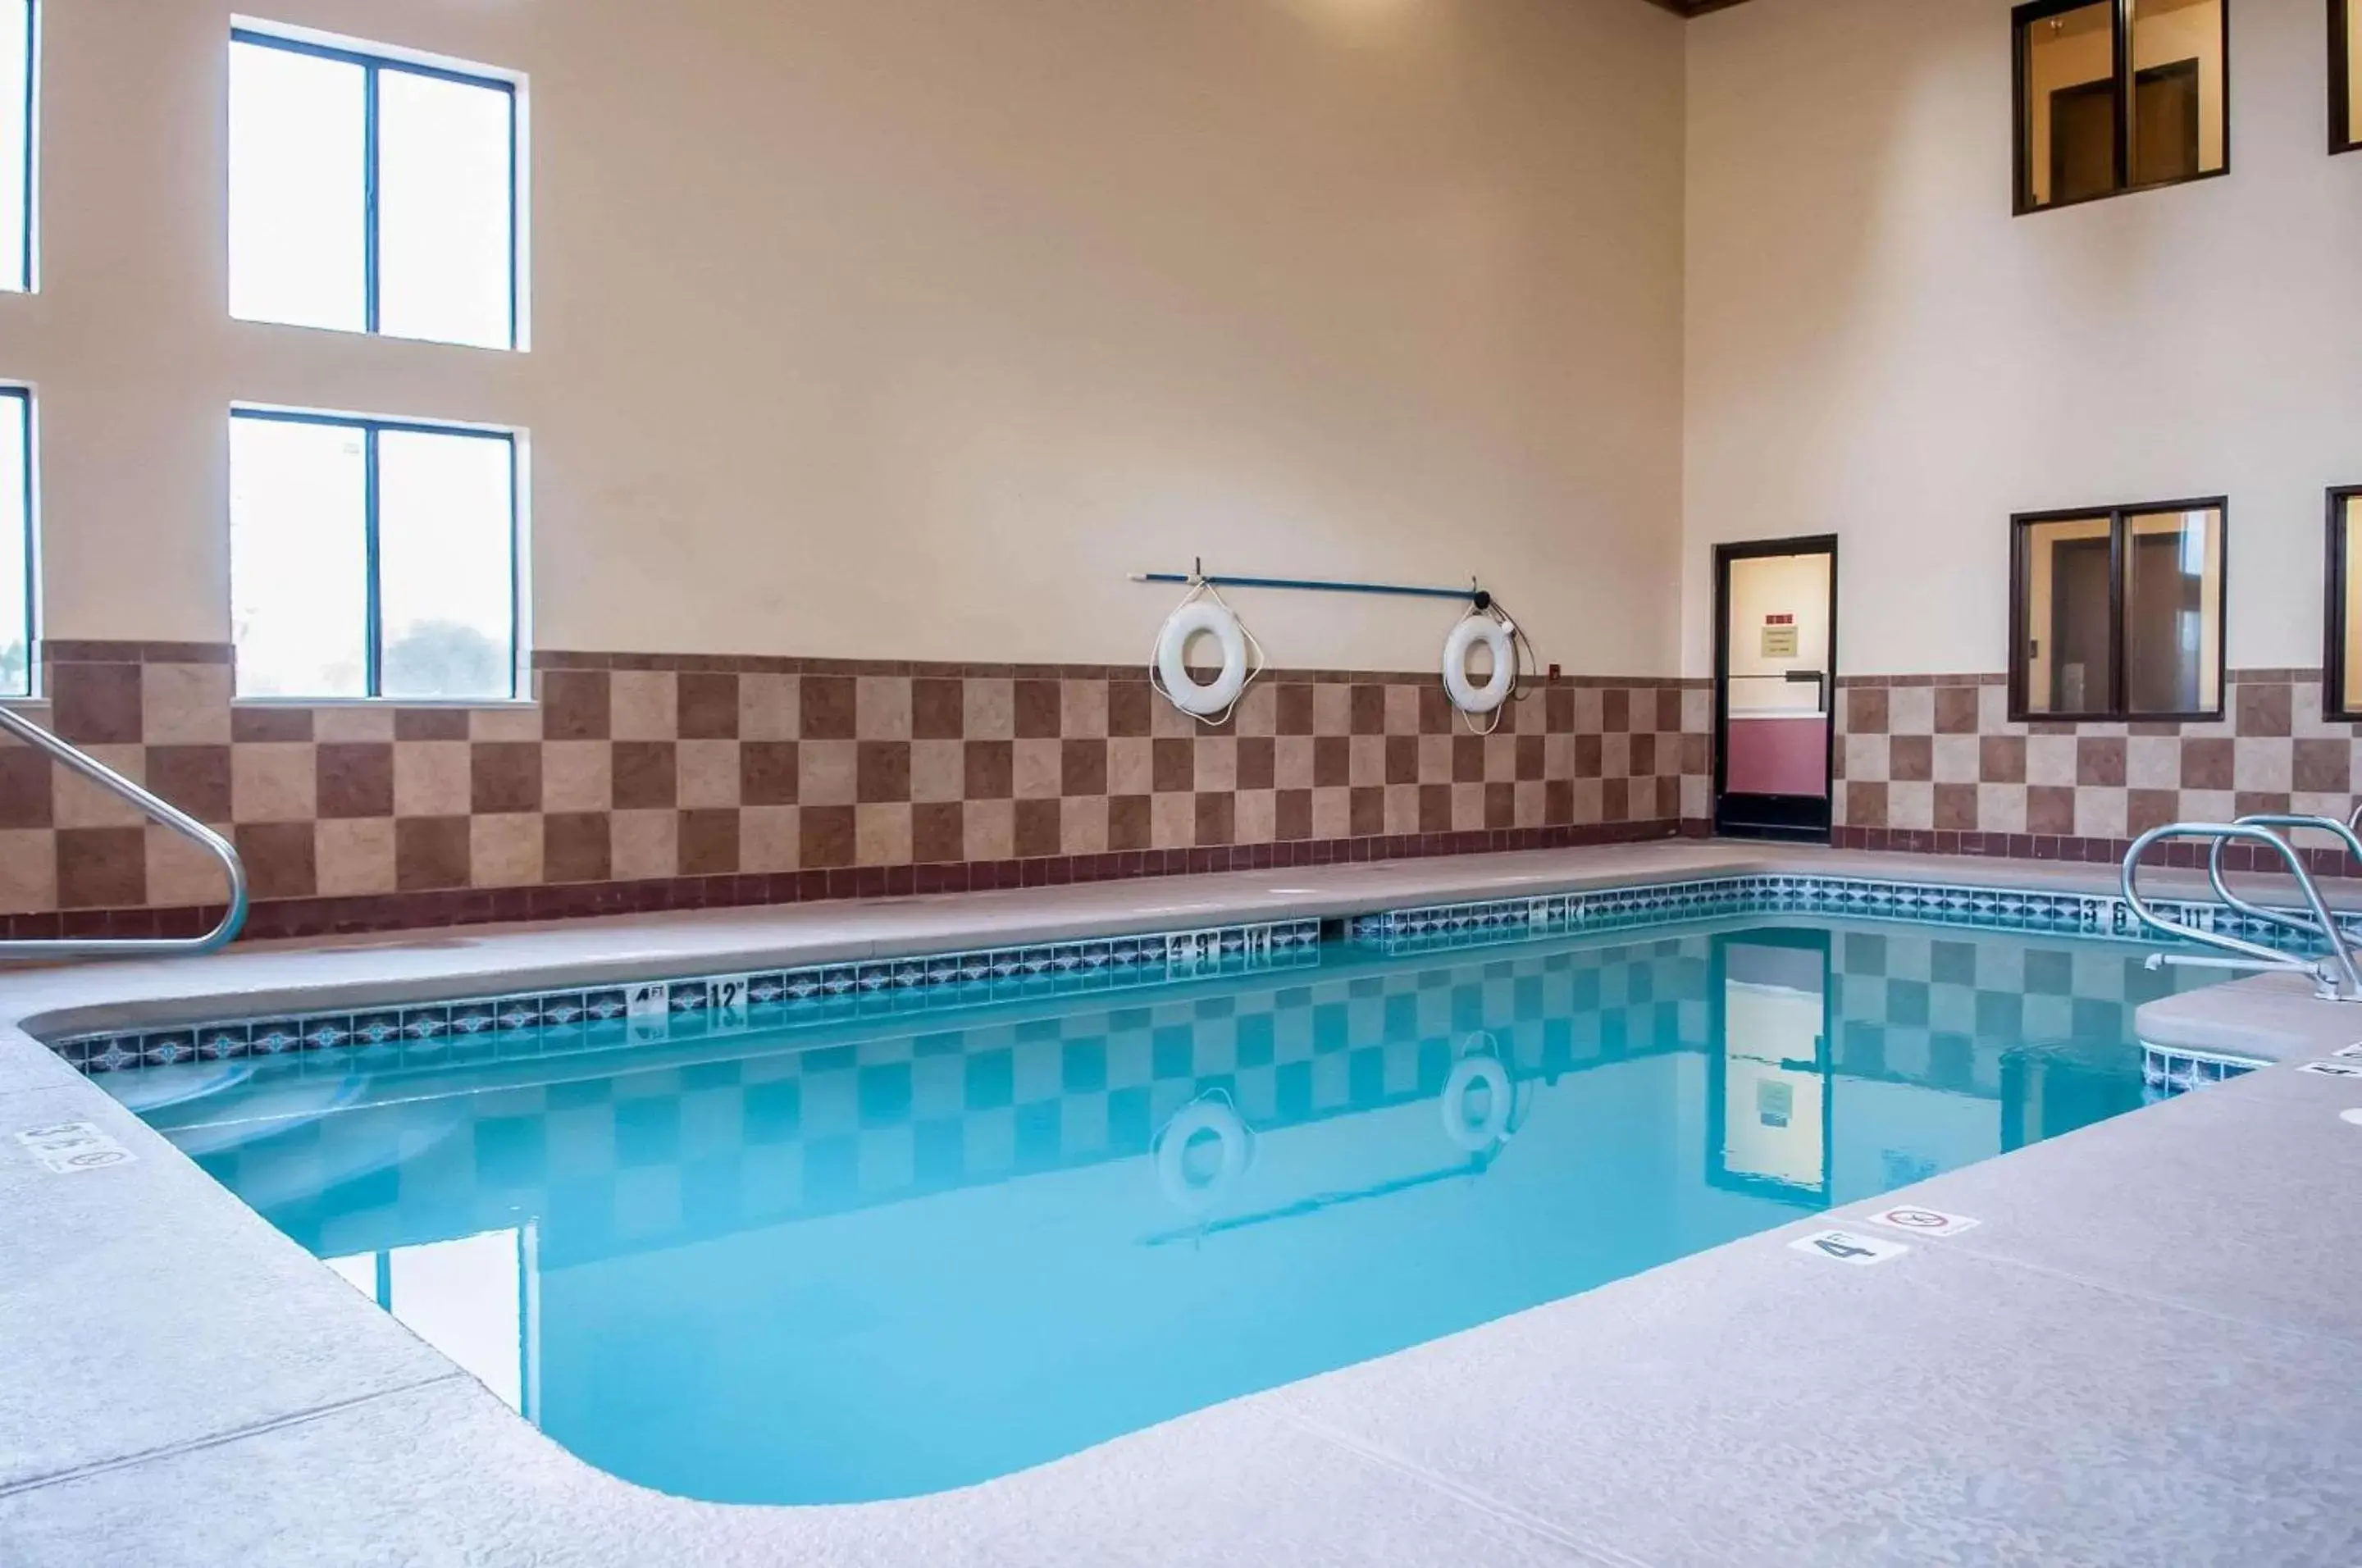 On site, Swimming Pool in Quality Inn Rio Rancho